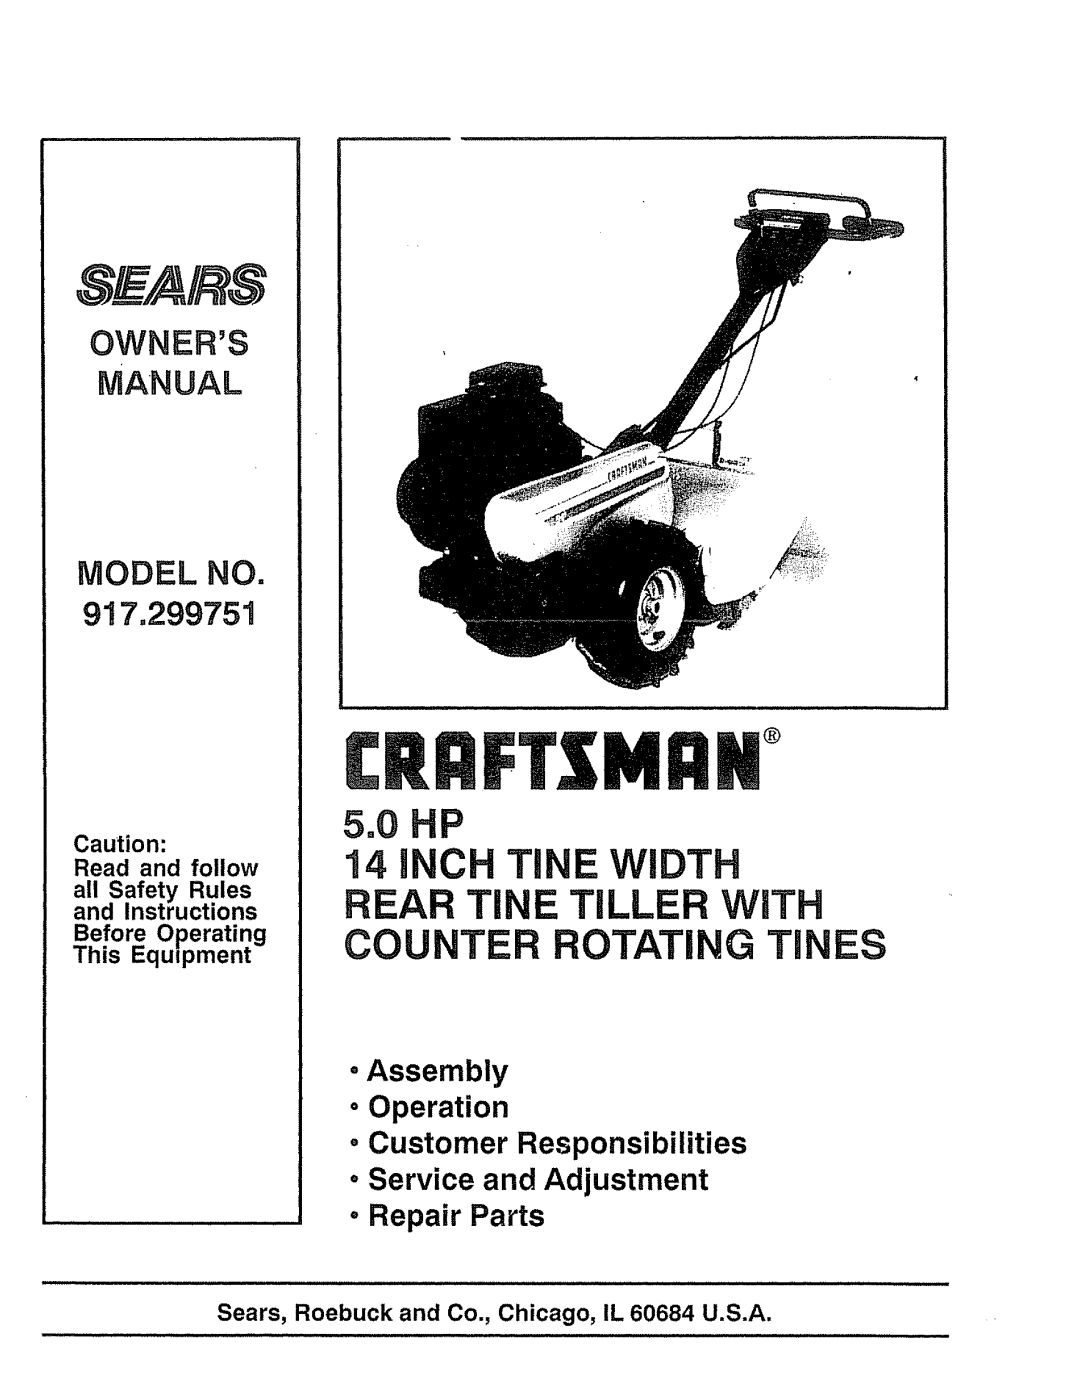 Craftsman 917-299751 owner manual 5.0 HP, Inch, Rear Tine Tiller W Th Counter Rotating Tines, CRRFrZMR# 